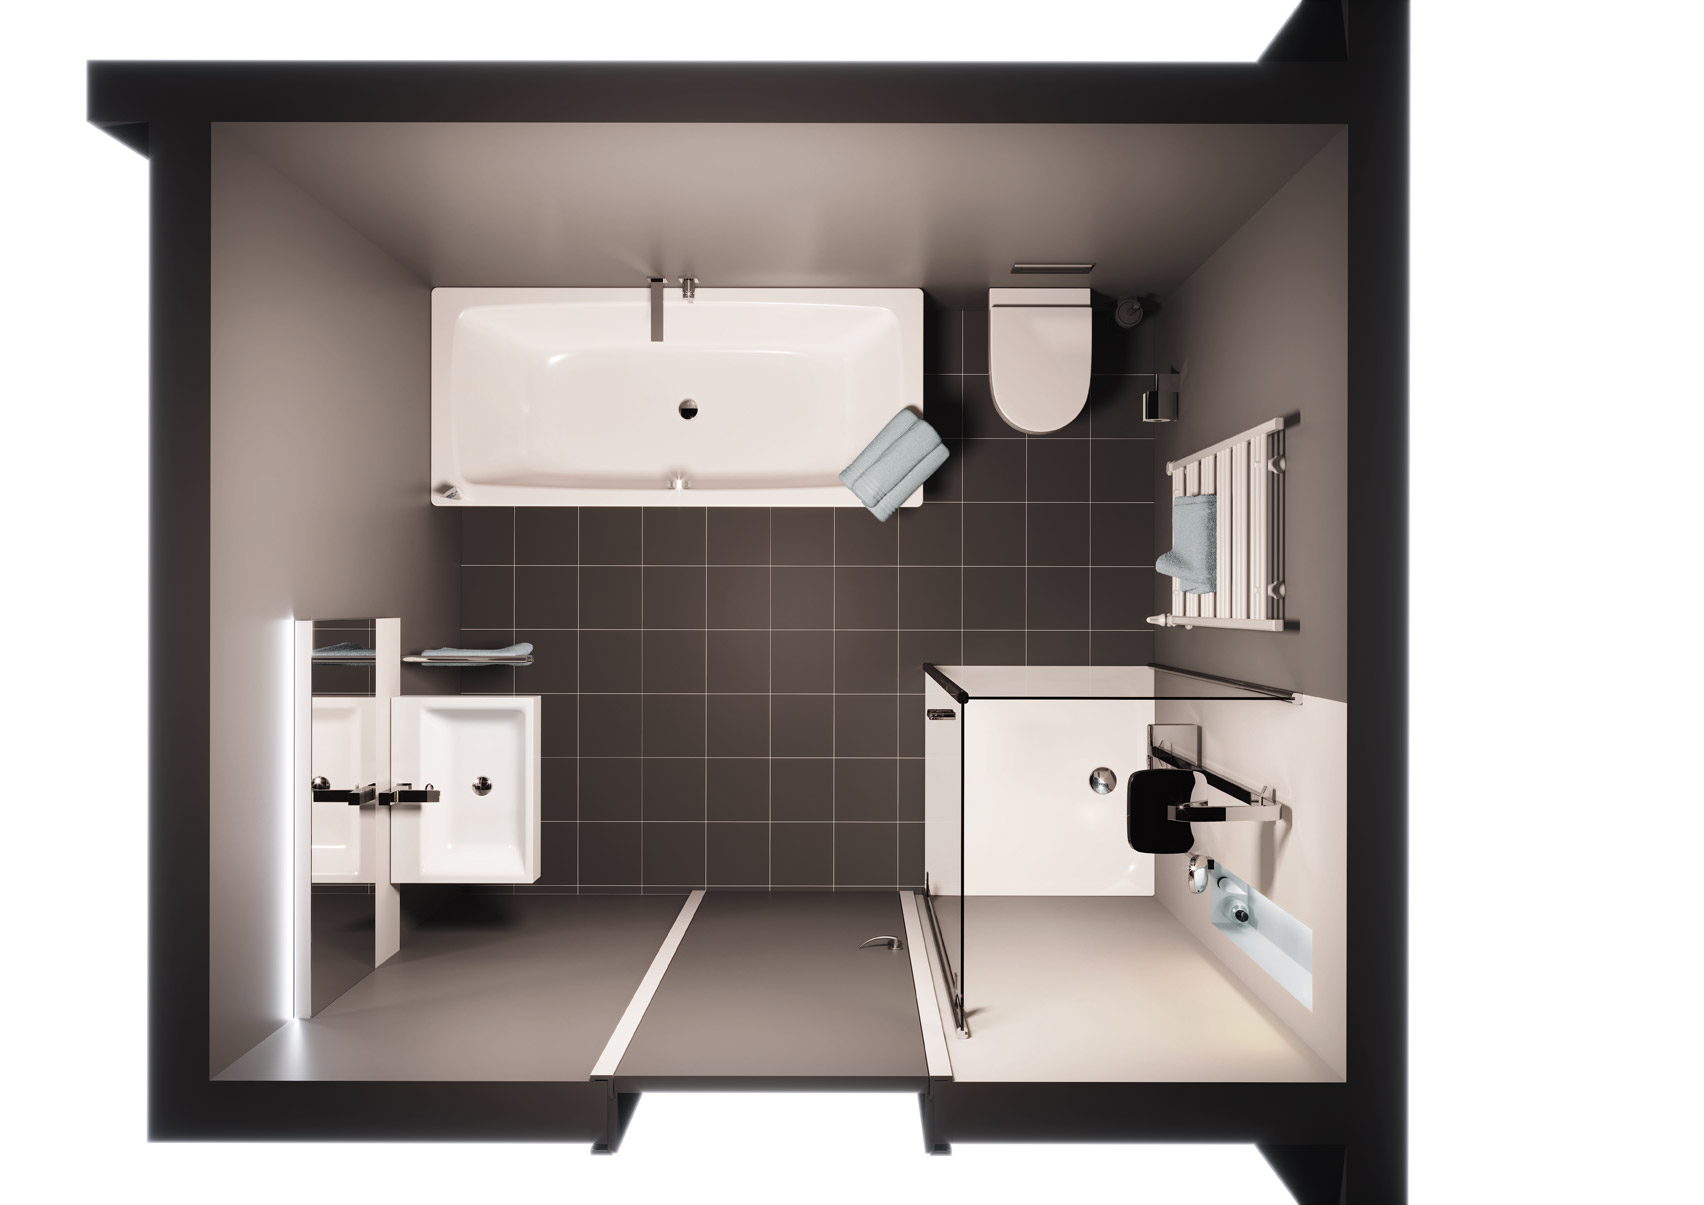 German bathroom company Kaldewei offers BIM data for clients to download promotions